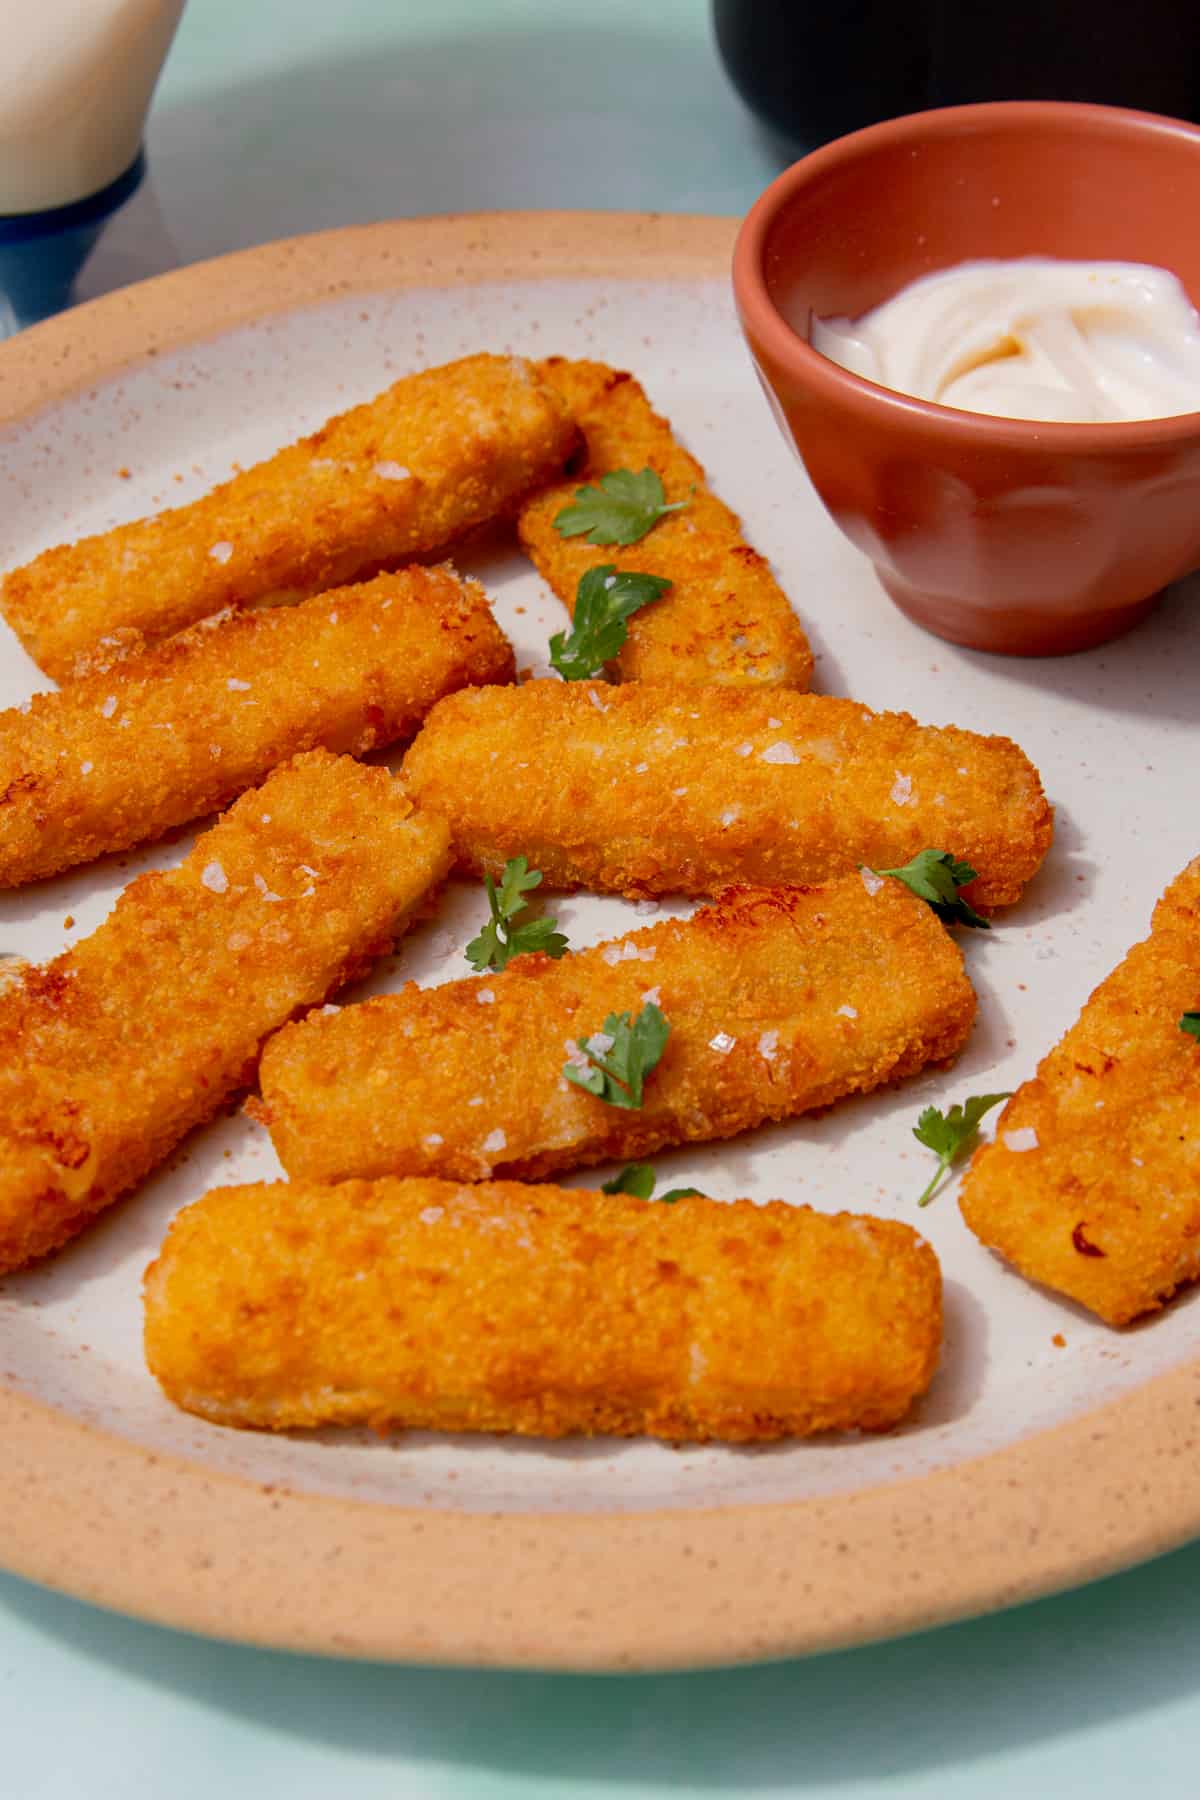 8 fish fingers on a plate topped with parsley with a small bowl of mayonnaise.